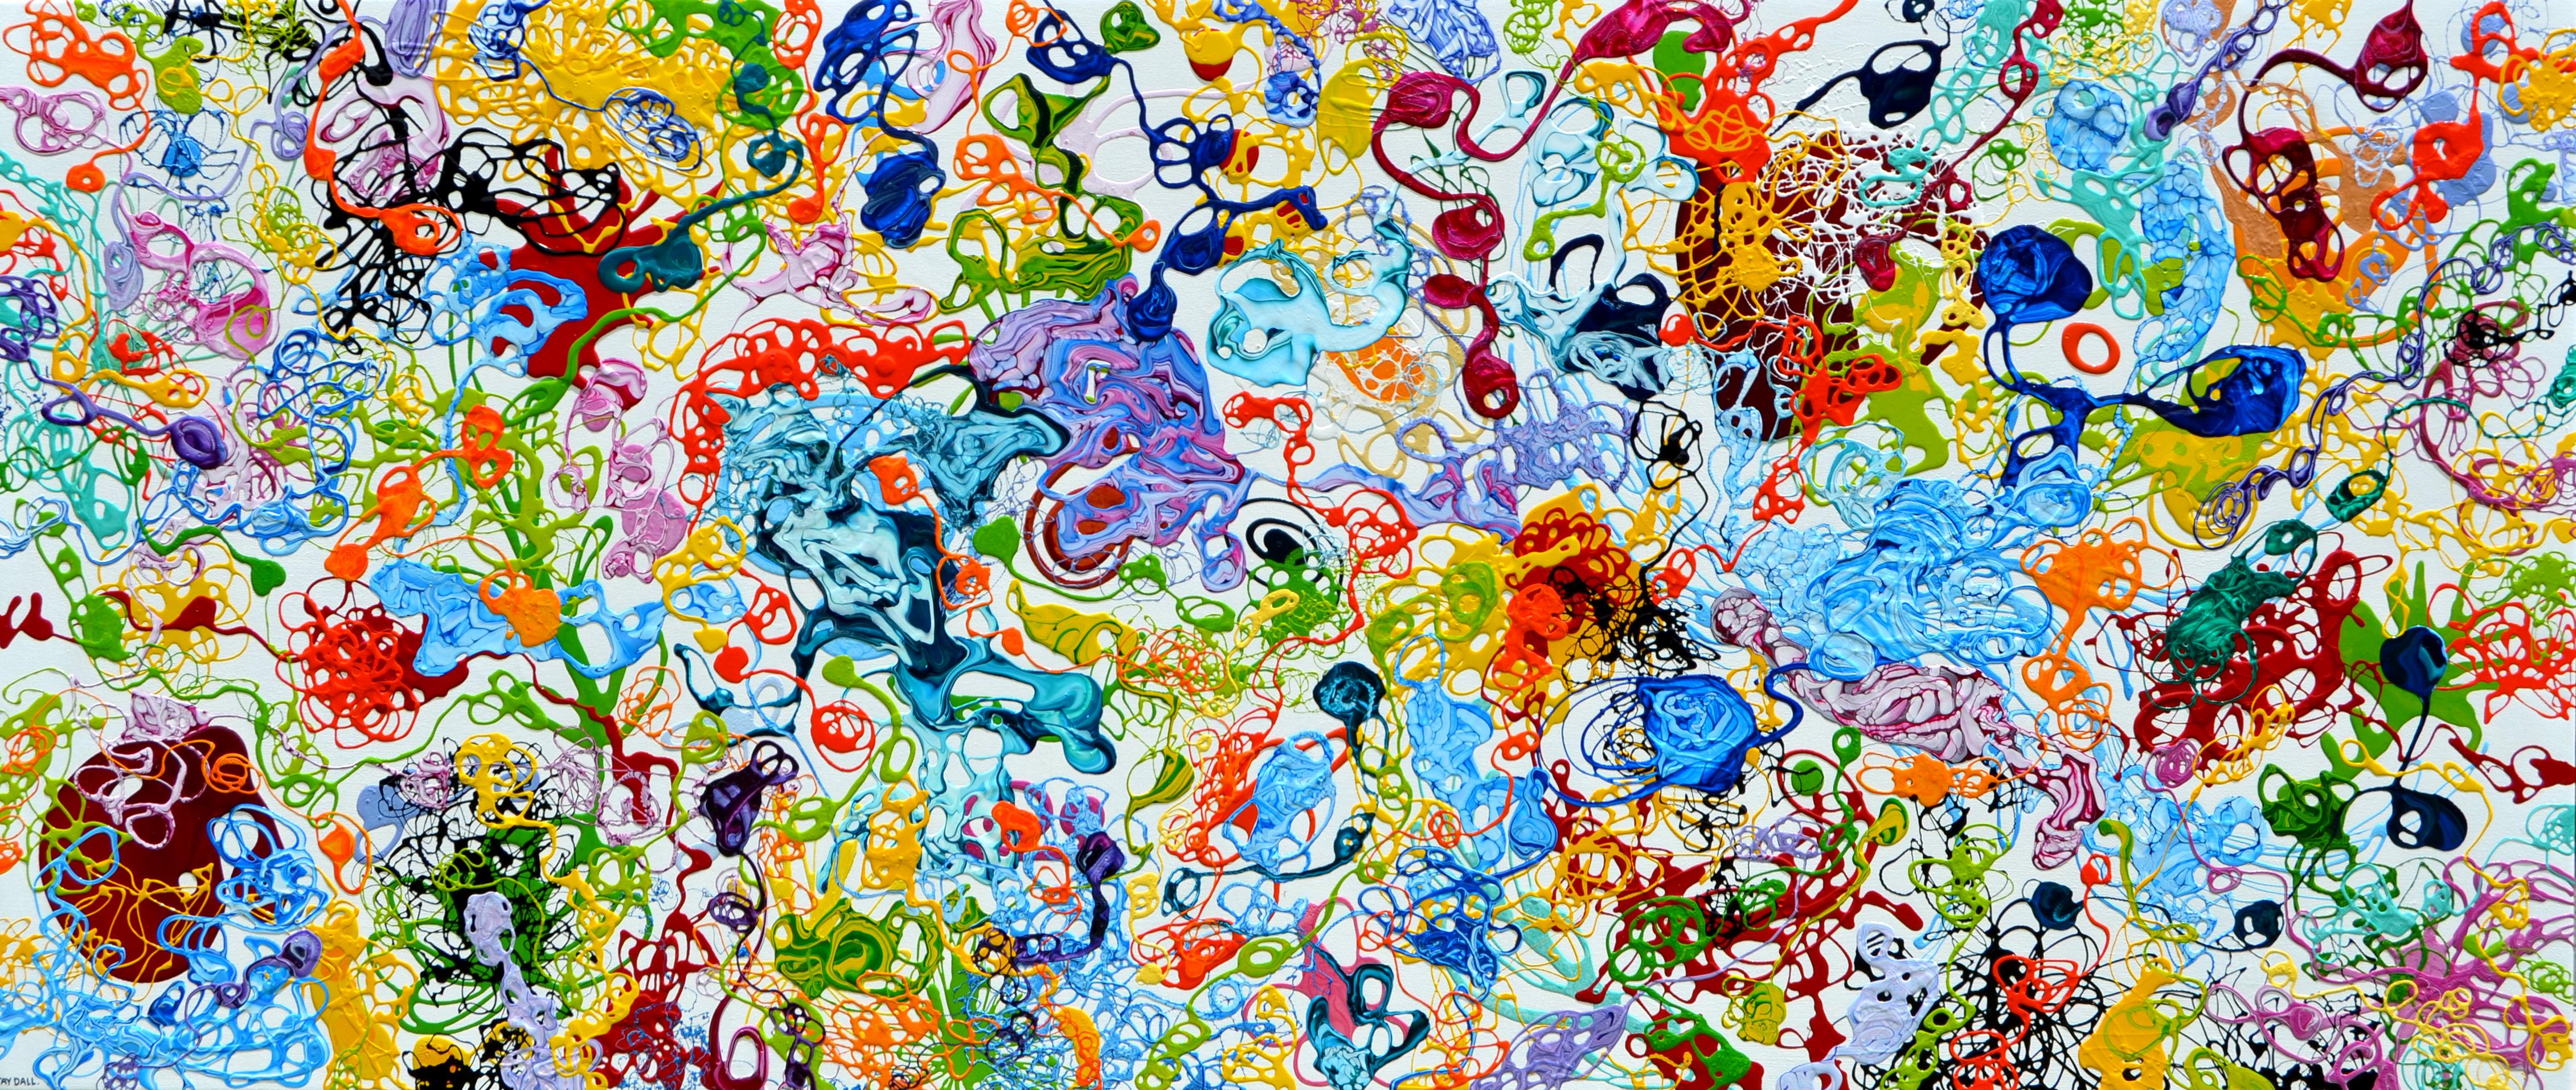 Tay Dall Abstract Painting - Large Abstract Enamel Painting "Garden of Magic Shimmer"